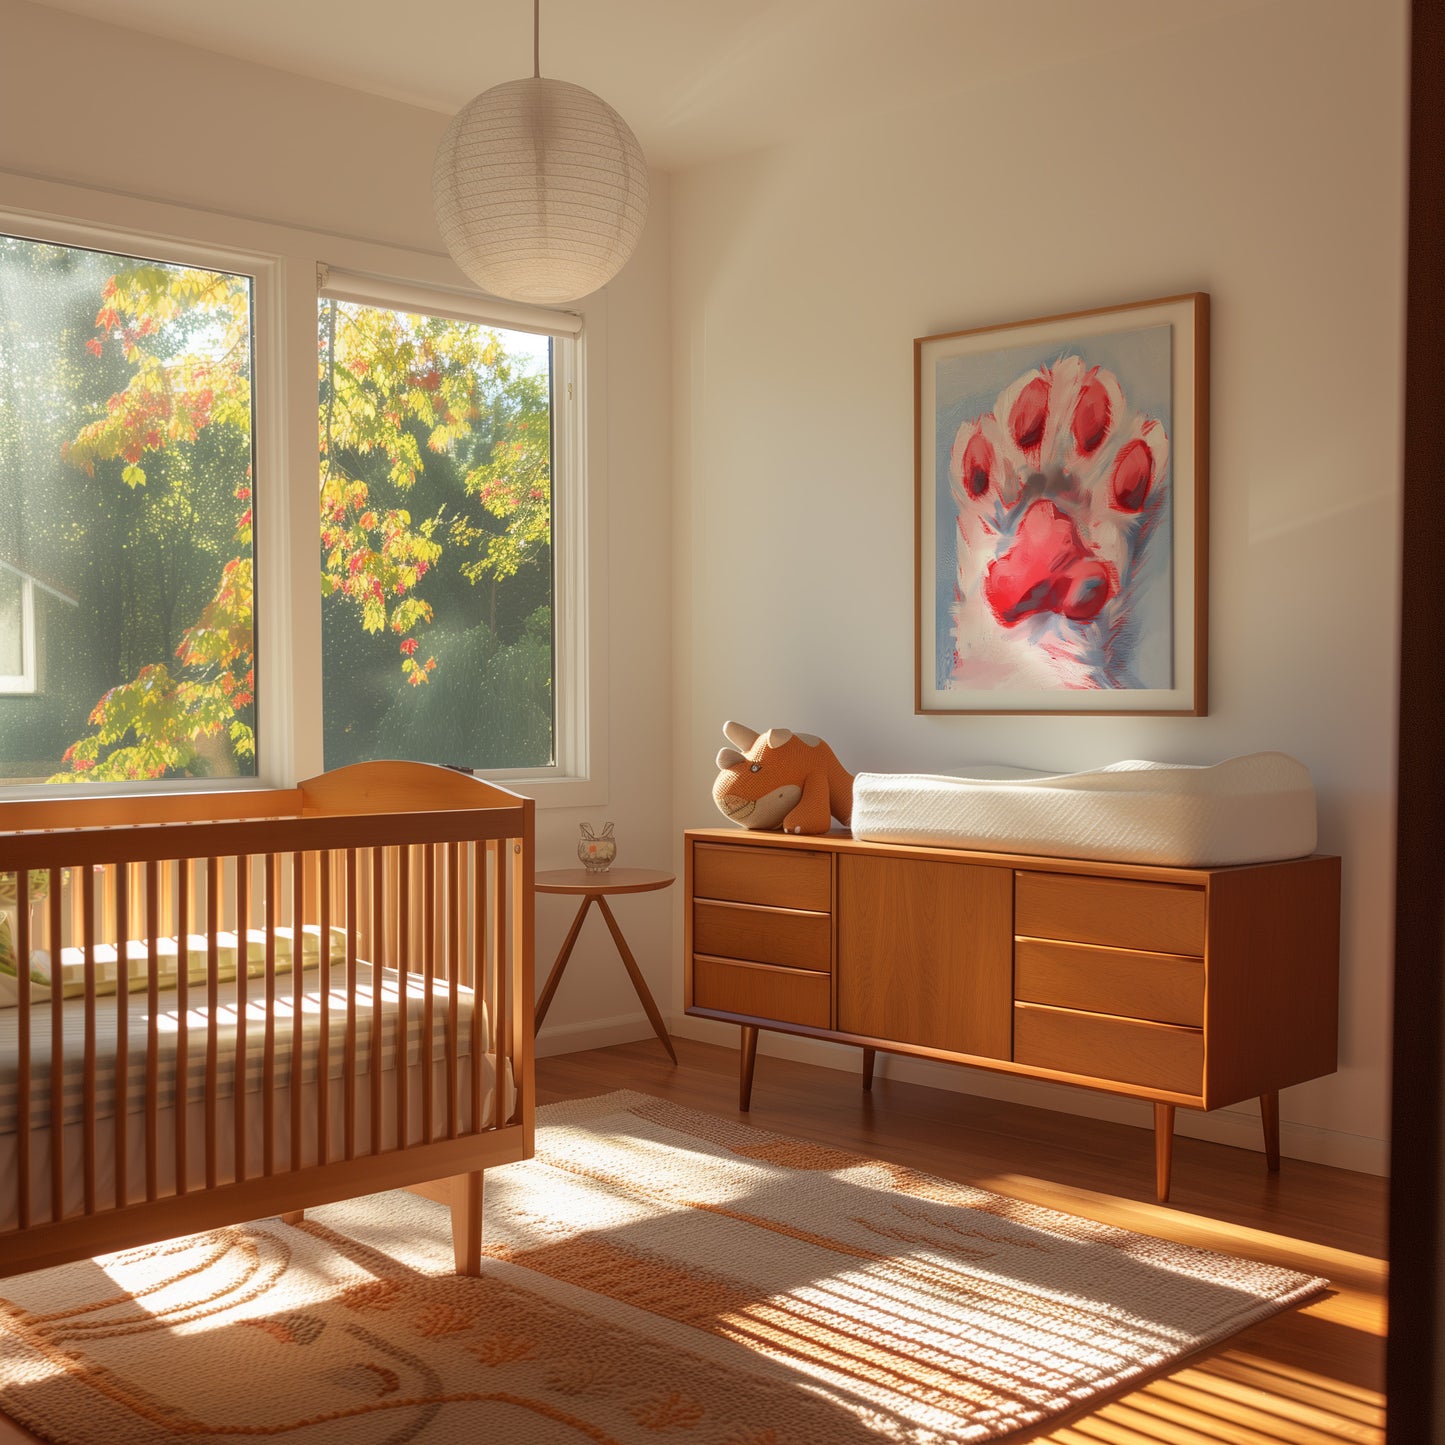 Sunny nursery room with a crib, dresser, and colorful artwork on the wall.